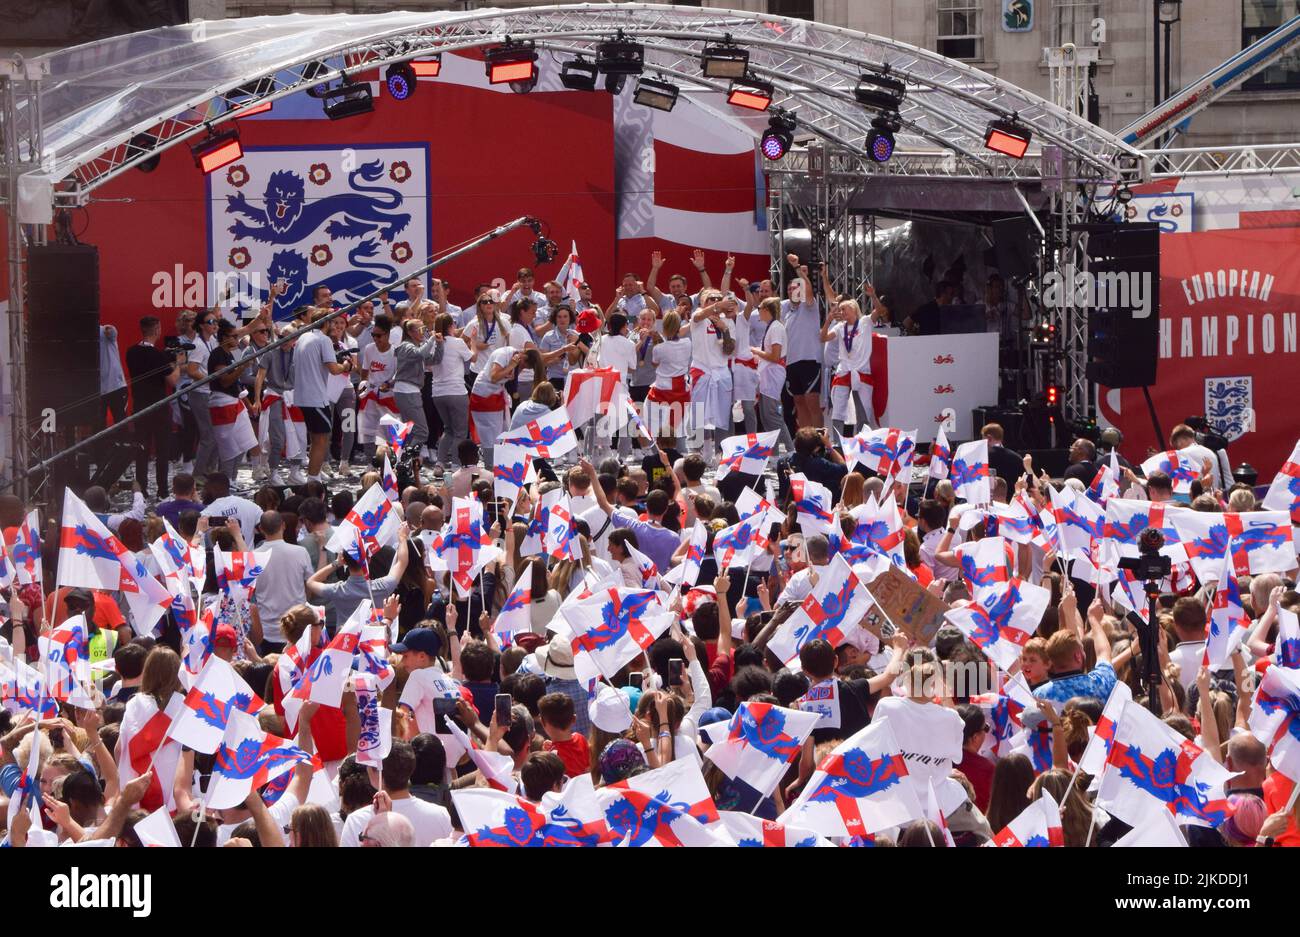 London, UK. 1st August 2022. The Lionesses celebrate on stage. Thousands of people gathered in Trafalgar Square to celebrate the England team - the Lionesses -  winning Women's Euro 2022 football tournament. Stock Photo